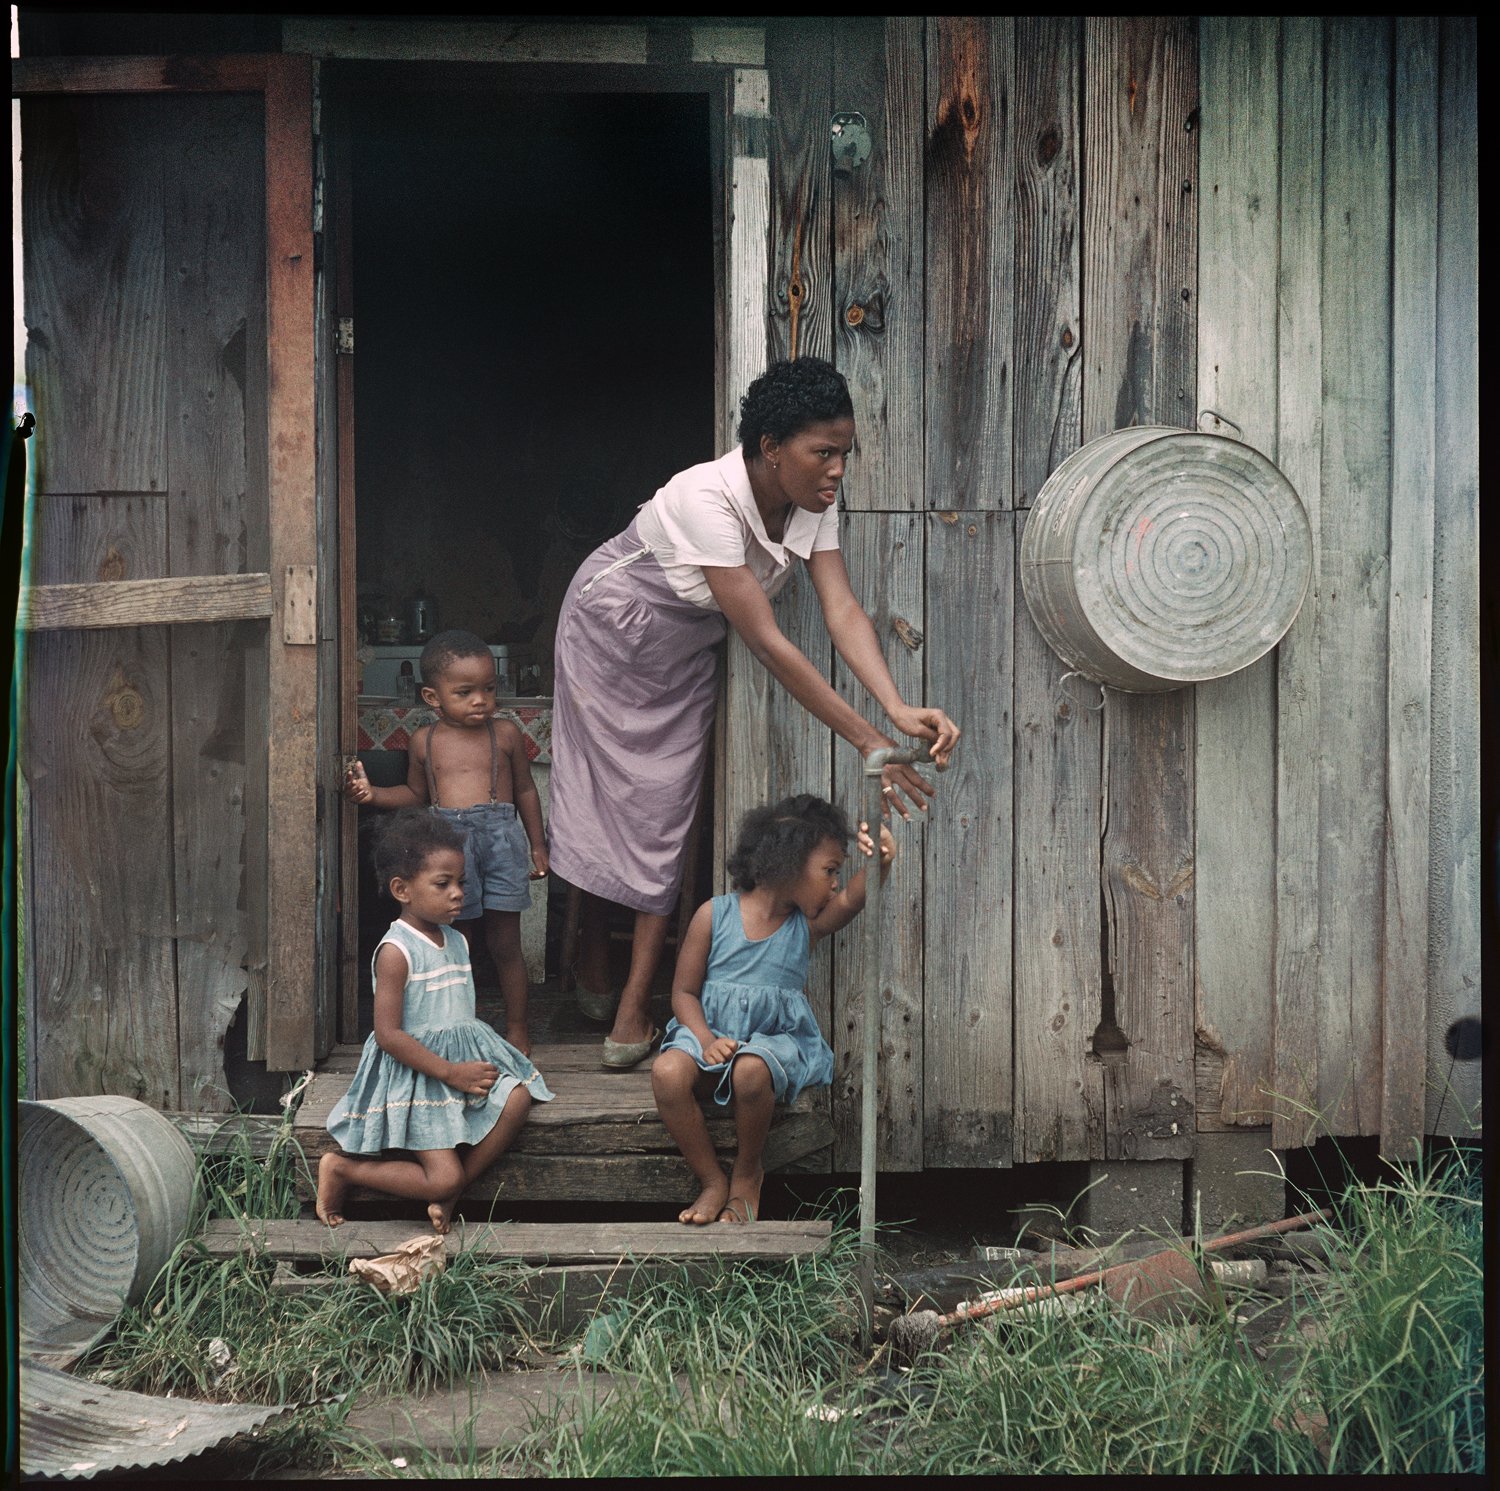  Gordon Parks  Mother and Children, Mobile, Alabama , 1956 Edition: 10/25 Archival pigment print  14 x 14 in. (image size)  The Do Good Fund, Inc., 2015-009 Photograph by Gordon Parks Courtesy of and copyright The Gordon Parks Foundation 